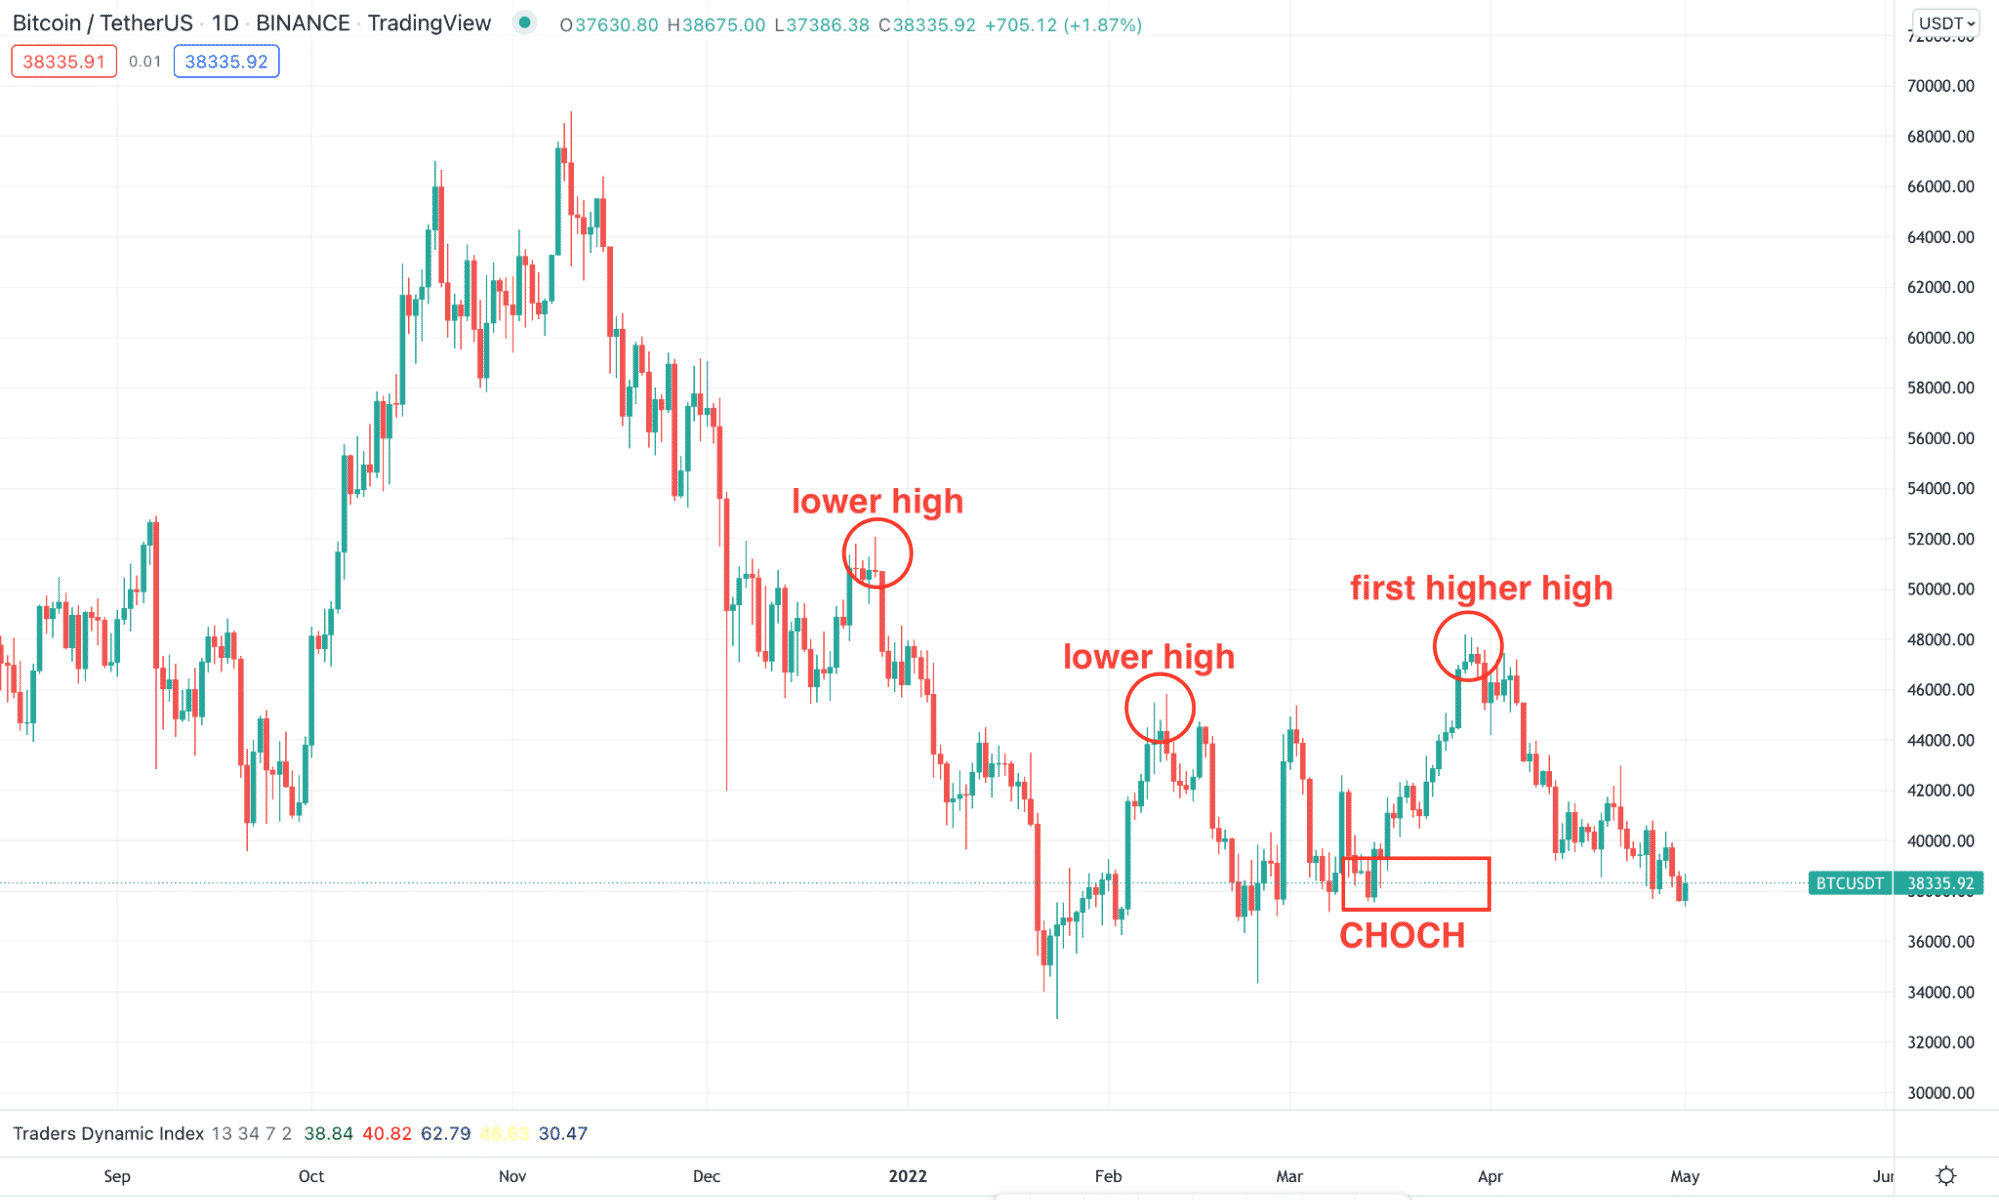 CHOCH in the Bitcoin price chart